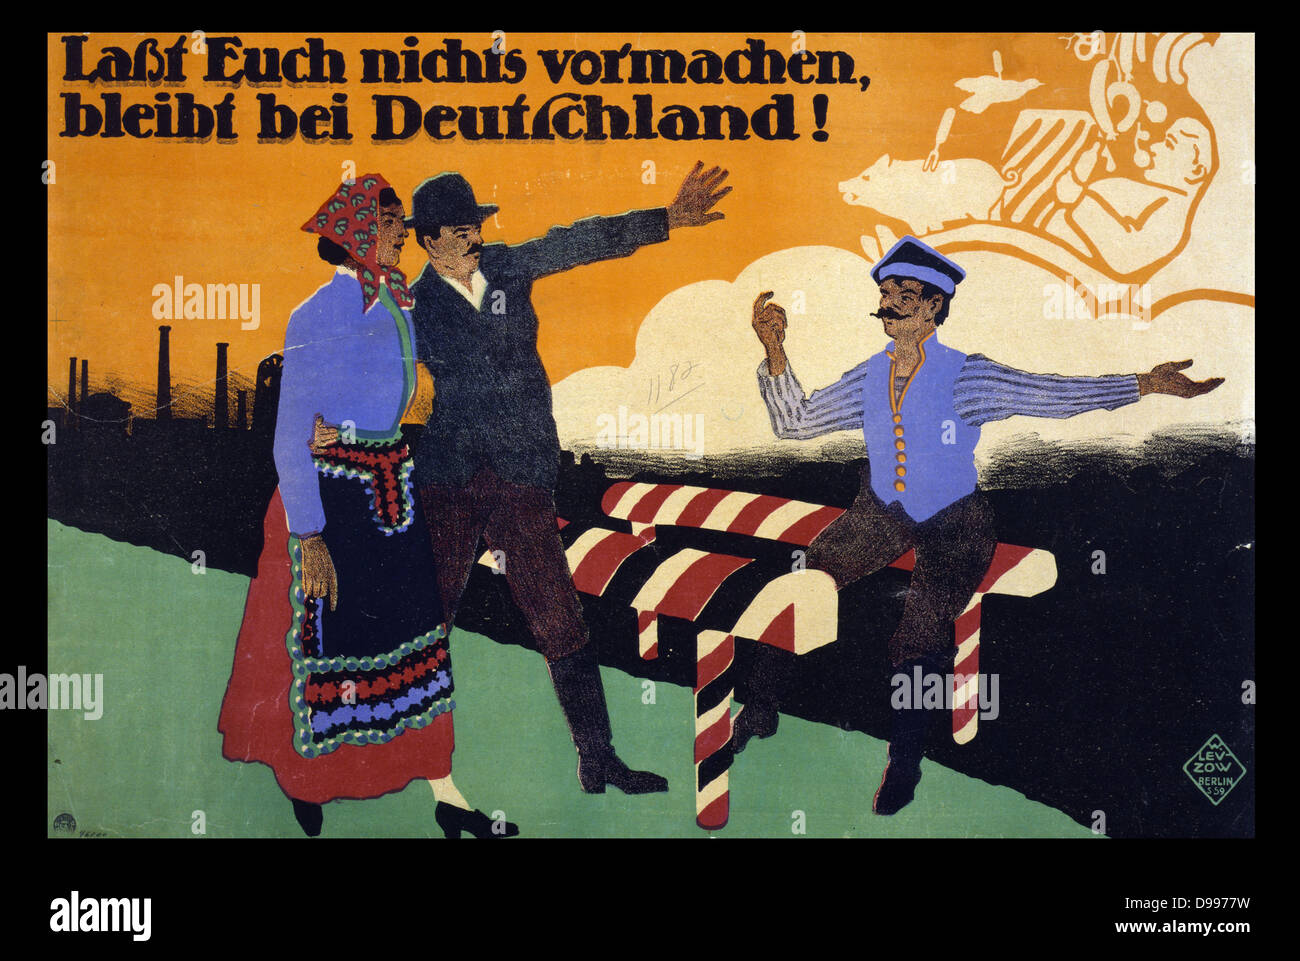 Last Euch nichts vormachen, bleibt bei Deutschland! (poster) lithograph 1919 by Wilhelm Levzow German artist. Poster shows a Polish man sitting on a Polish border gate and gesturing to a couple to go to Poland. Behind him are clouds forming image of man with plenty to eat. The couple on the German side of the border walk by, the man's arm raised as if shielding himself from the image. Text: Don't be fooled, stay with Germany! Stock Photo